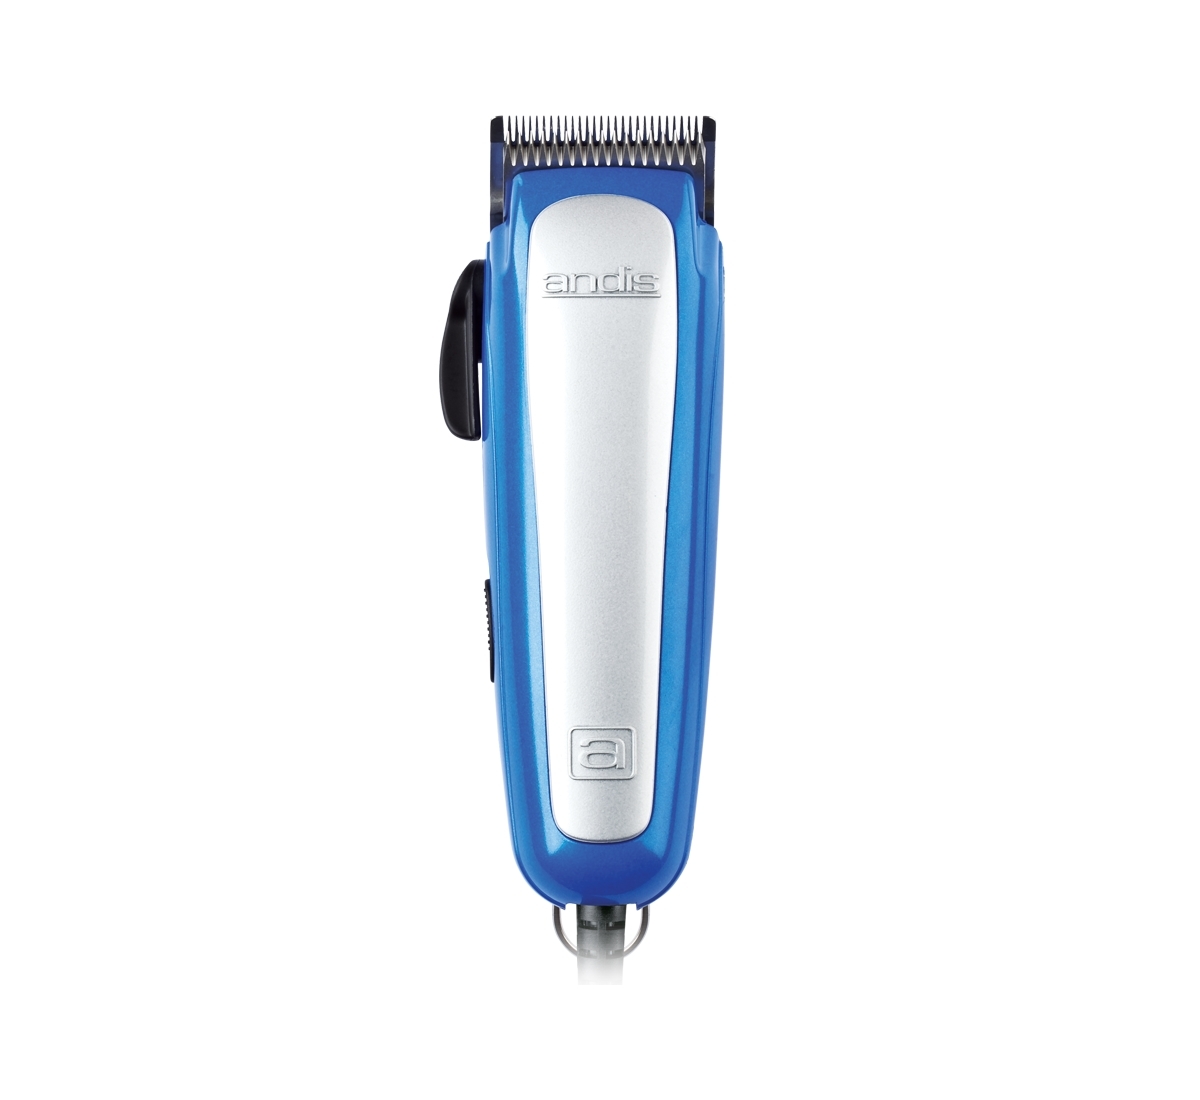 andis mini clippers